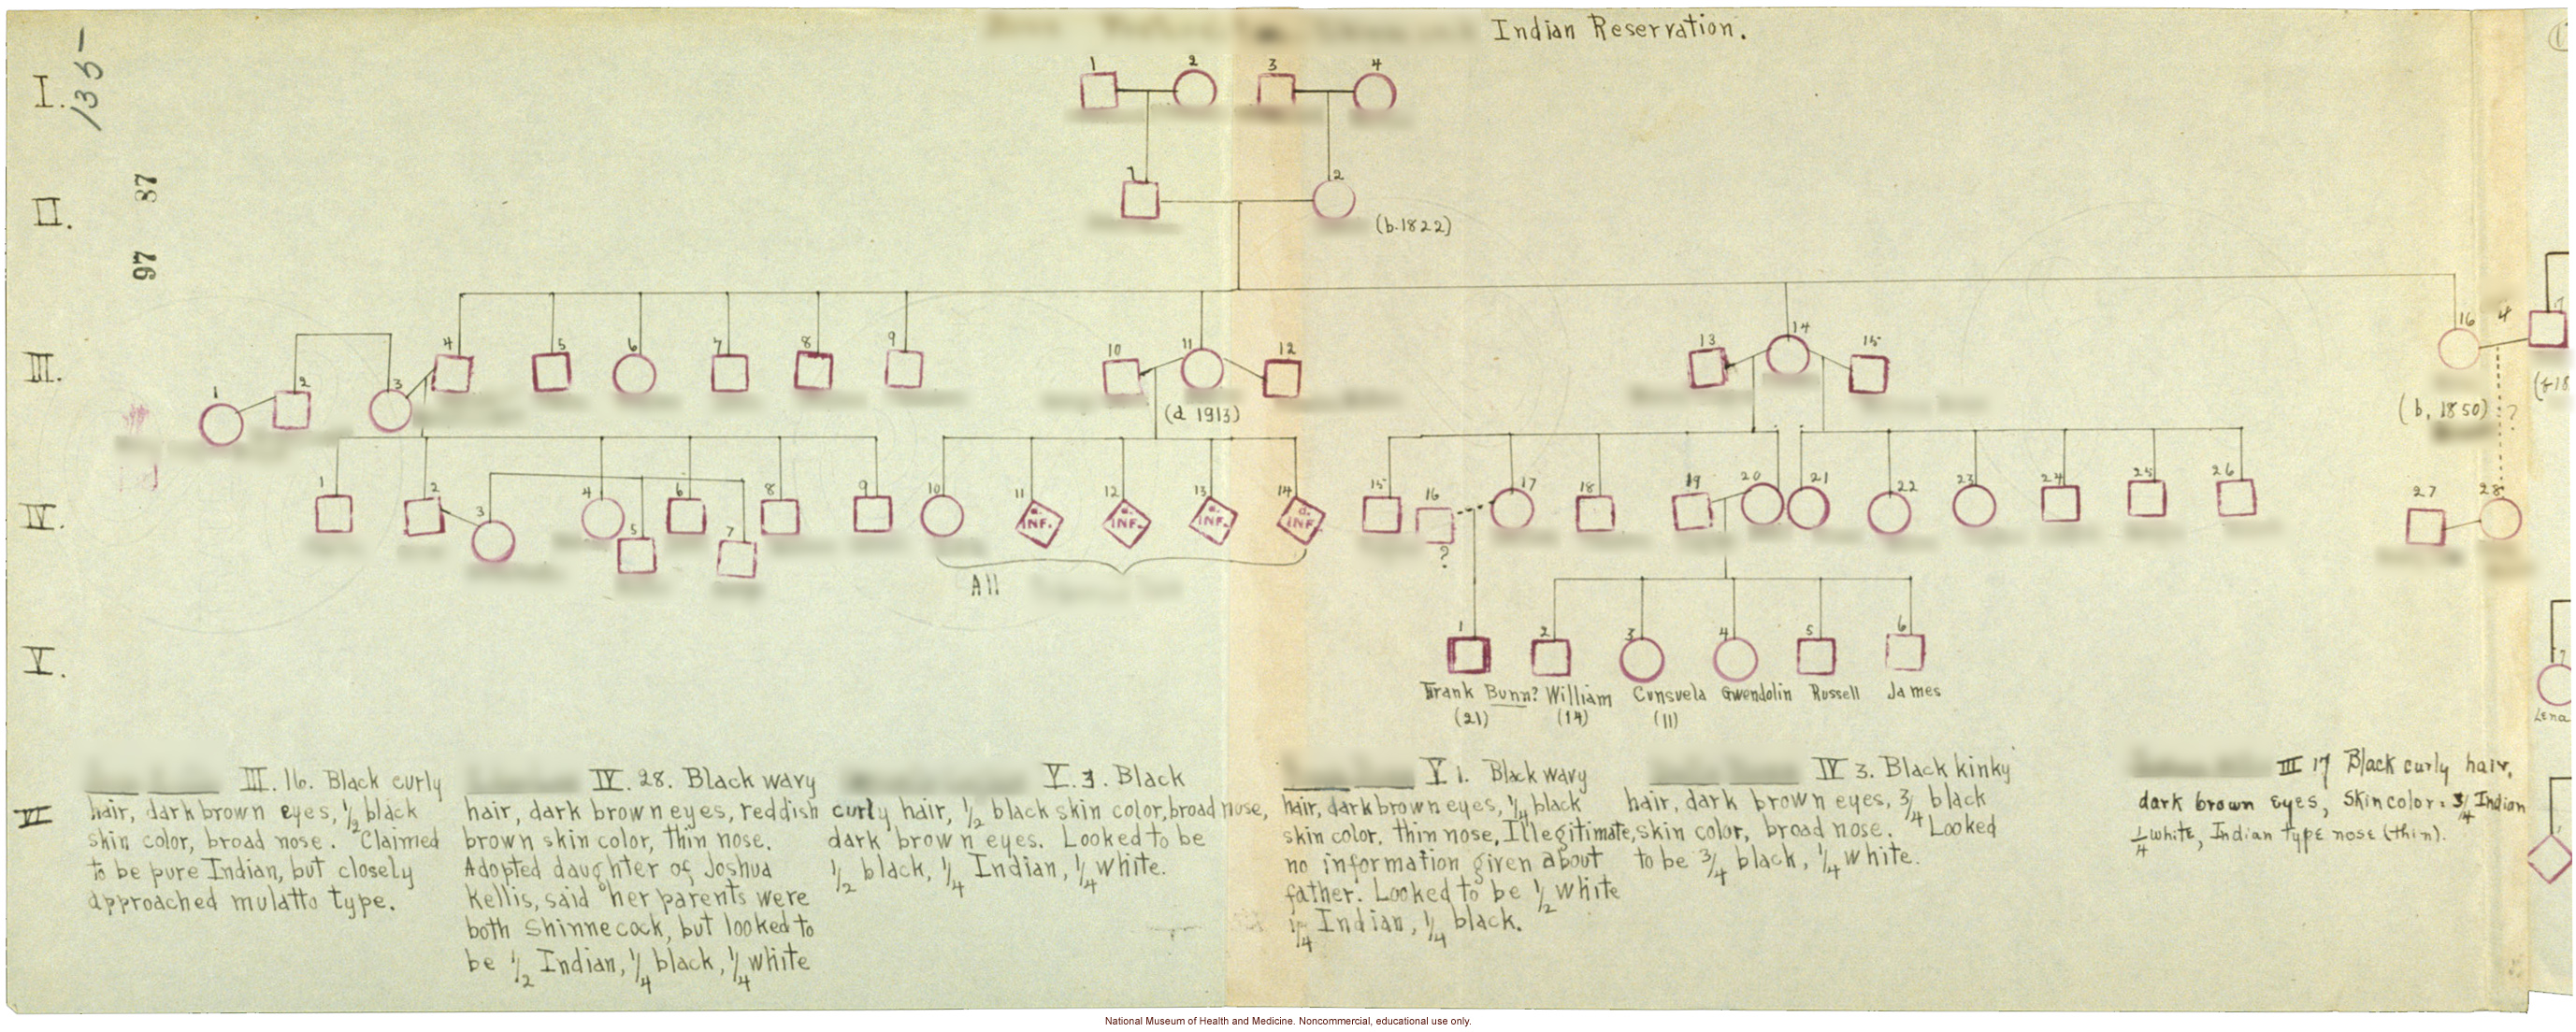 Anthropometric case materials on a Shinnecock Indian Family of Eastern Long Island (photographs, pedigree, field notes, and physical measurements)